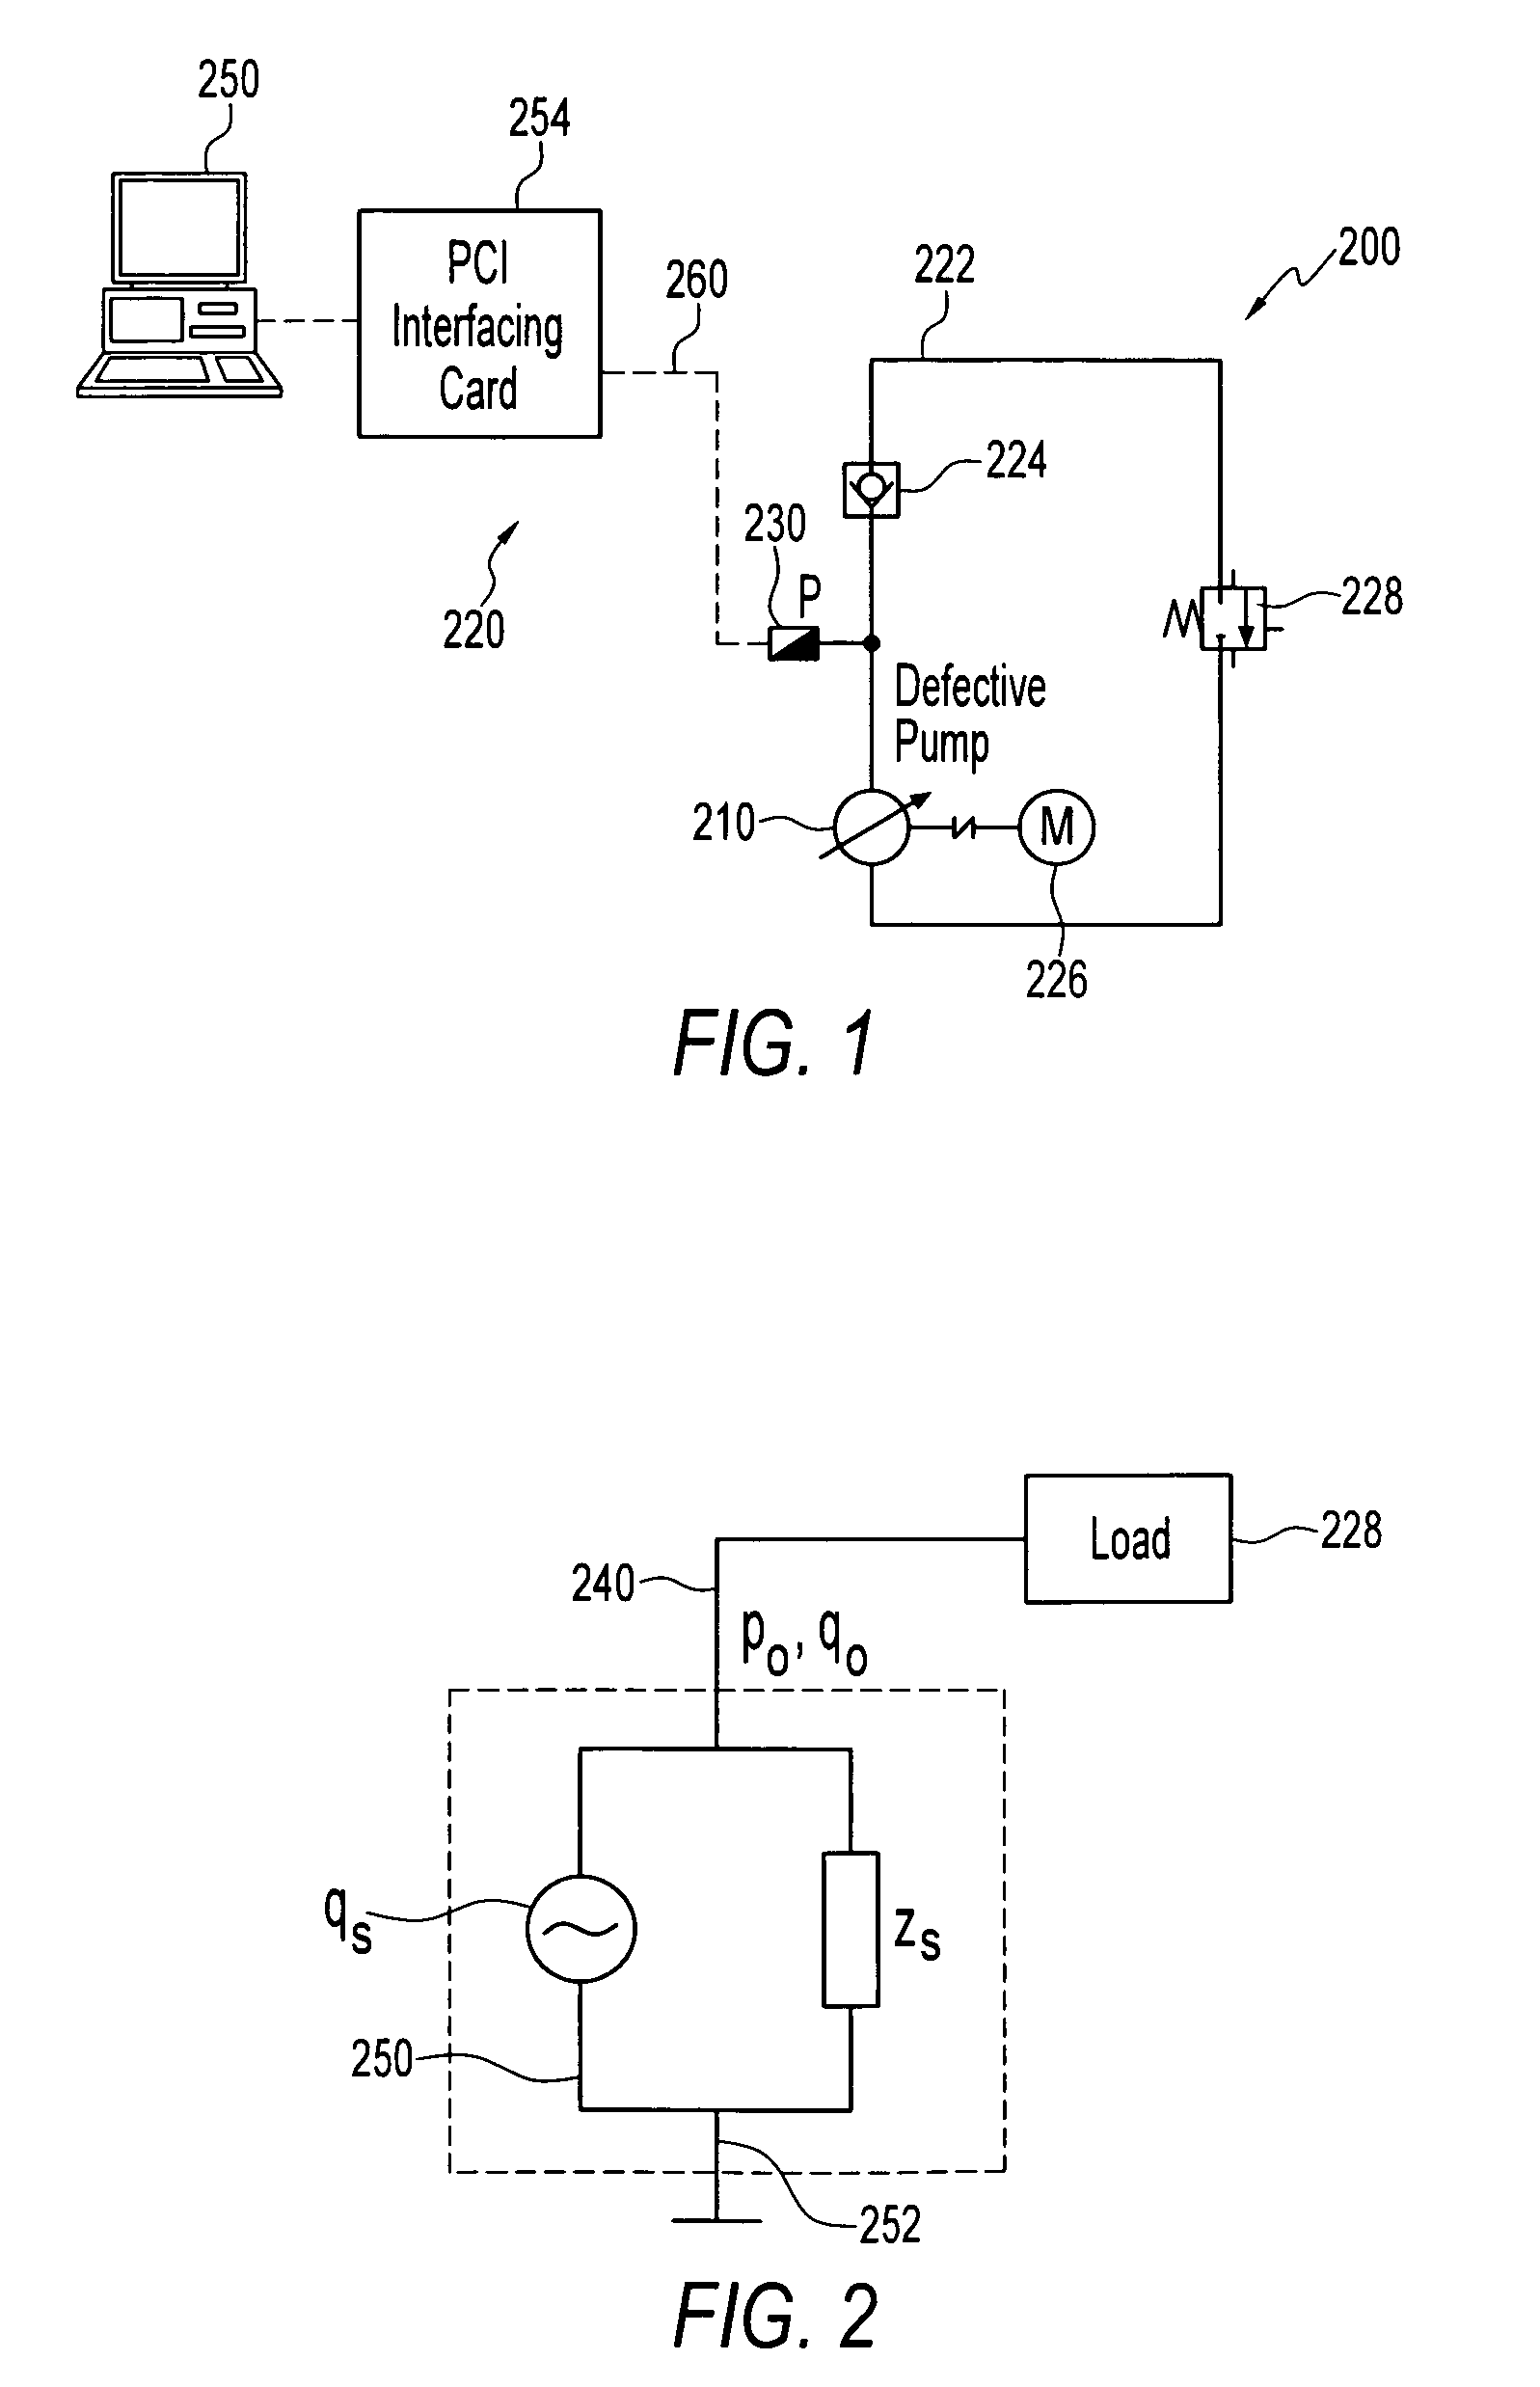 Method and apparatus for analyzing performance of a hydraulic pump